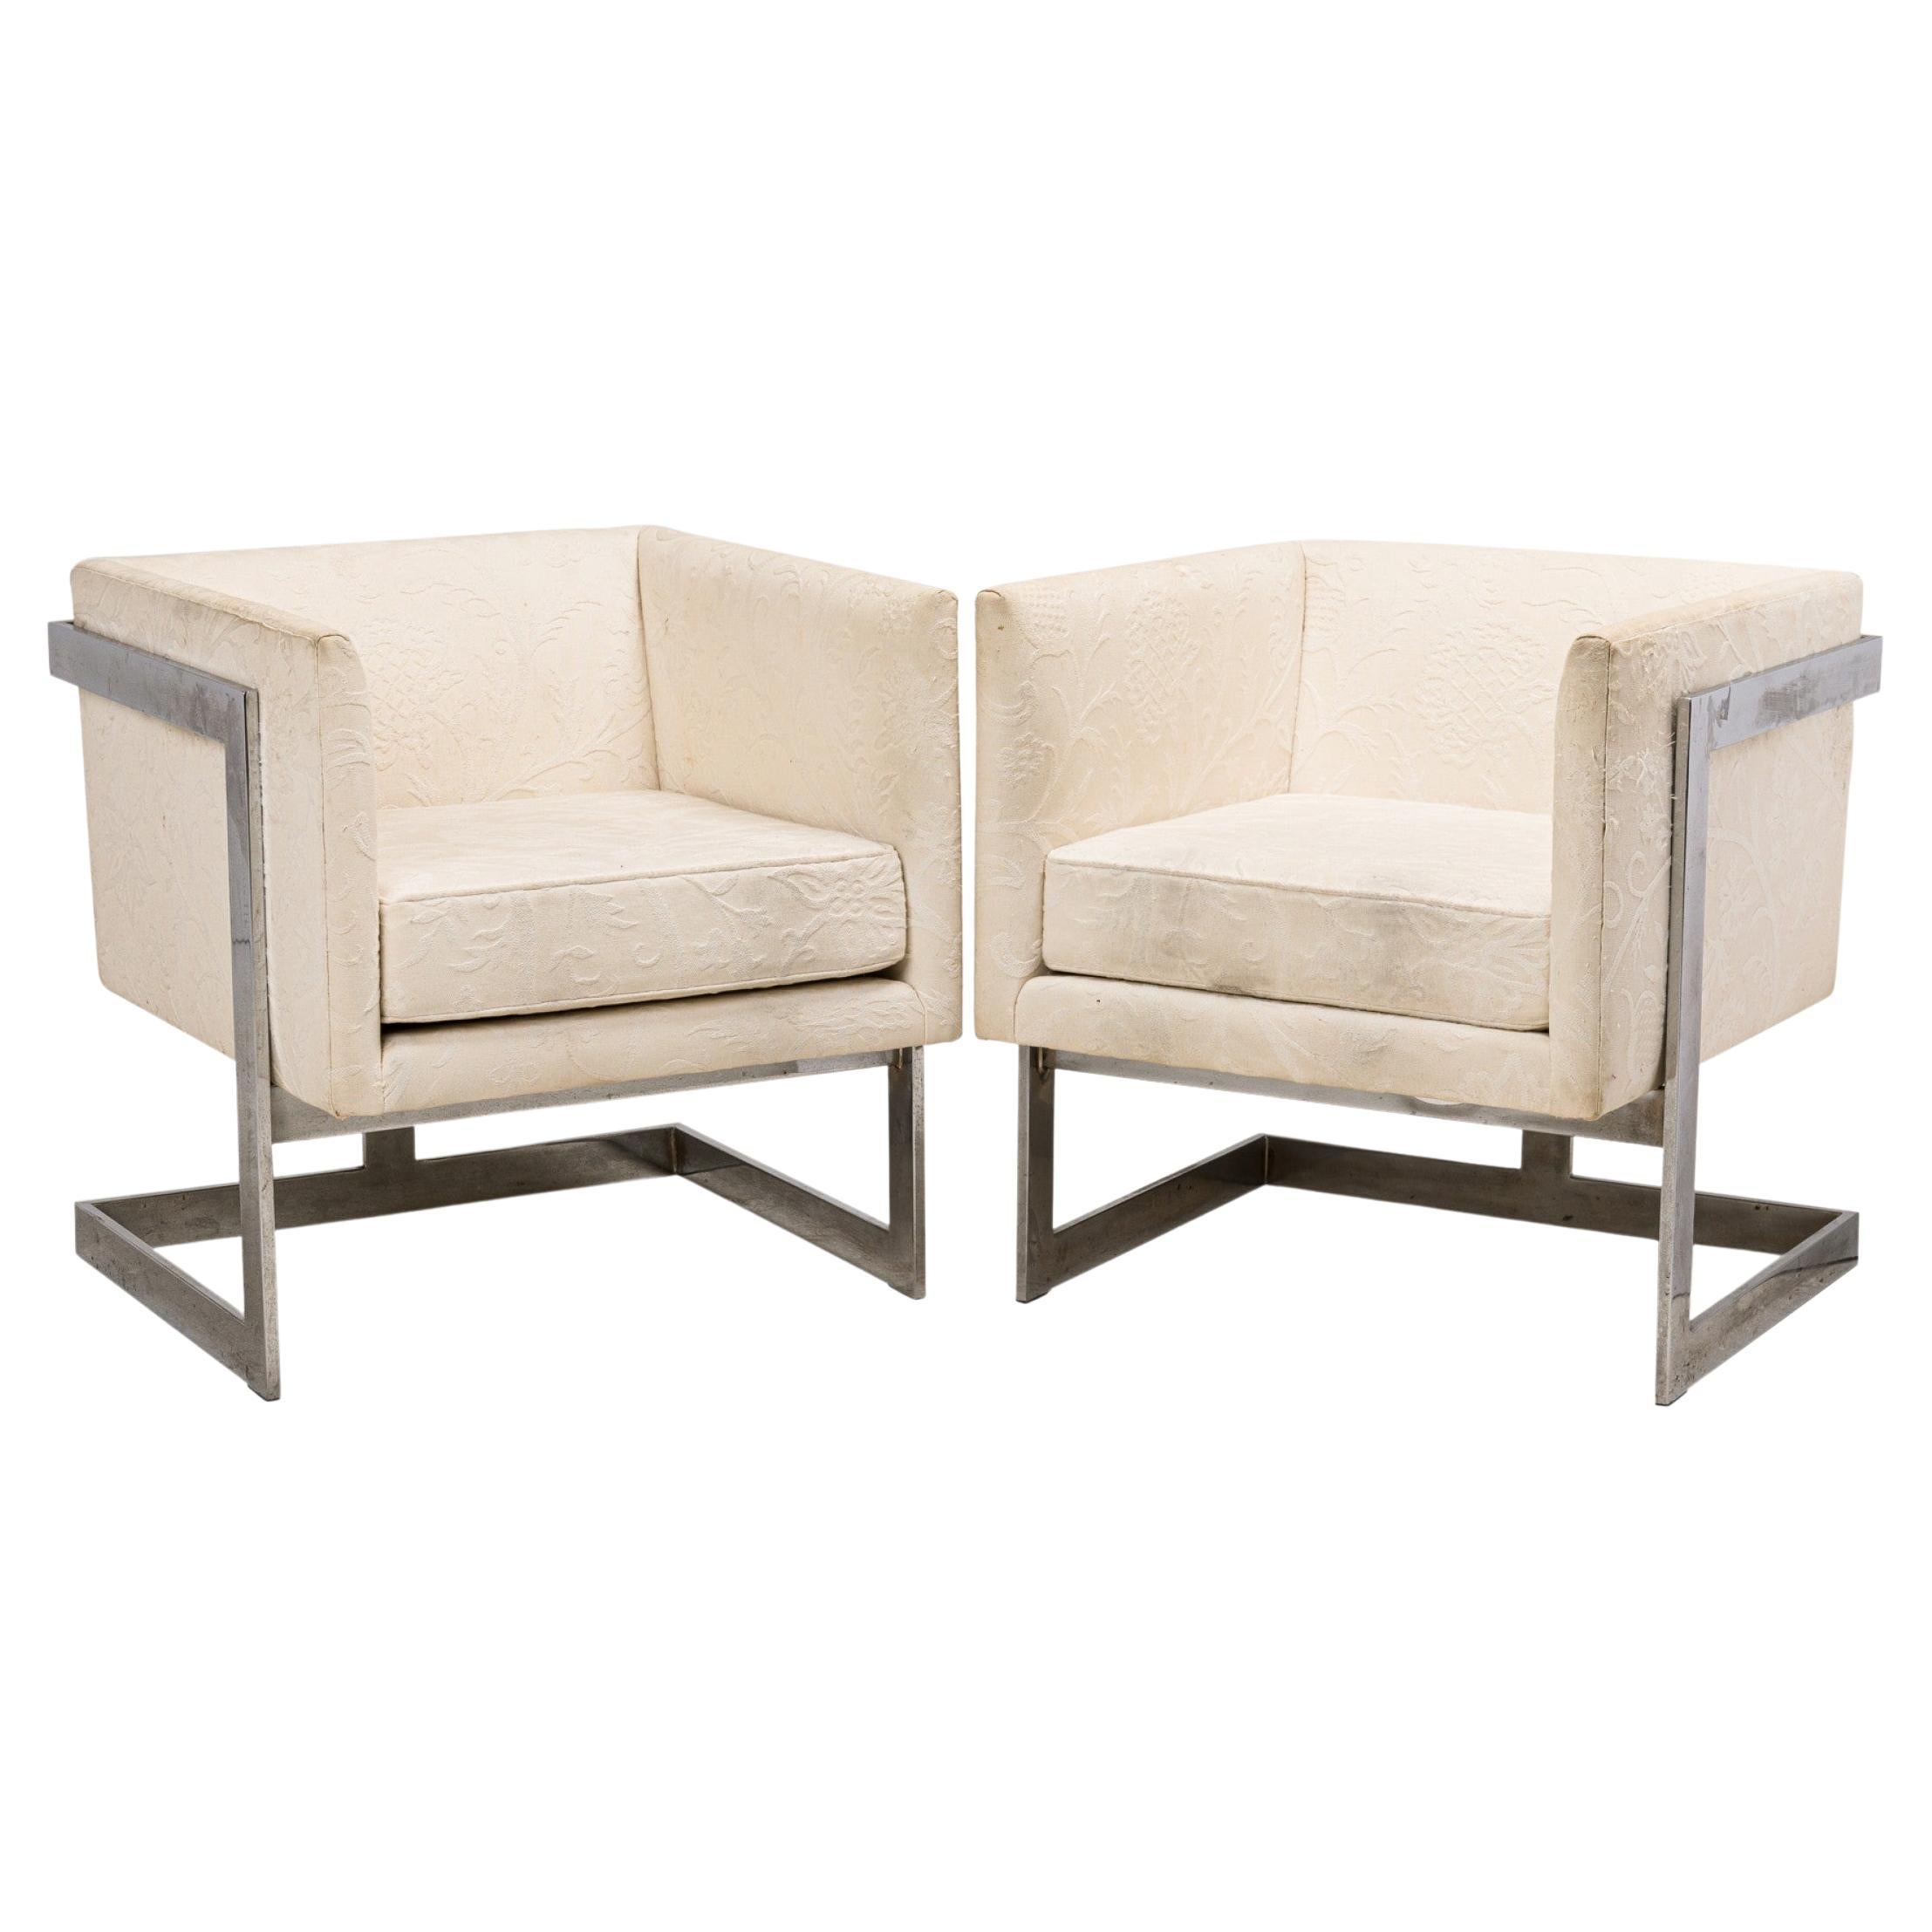 Pair of Milo Baughman Floating Cube Chrome and Beige Upholstery Armchairs